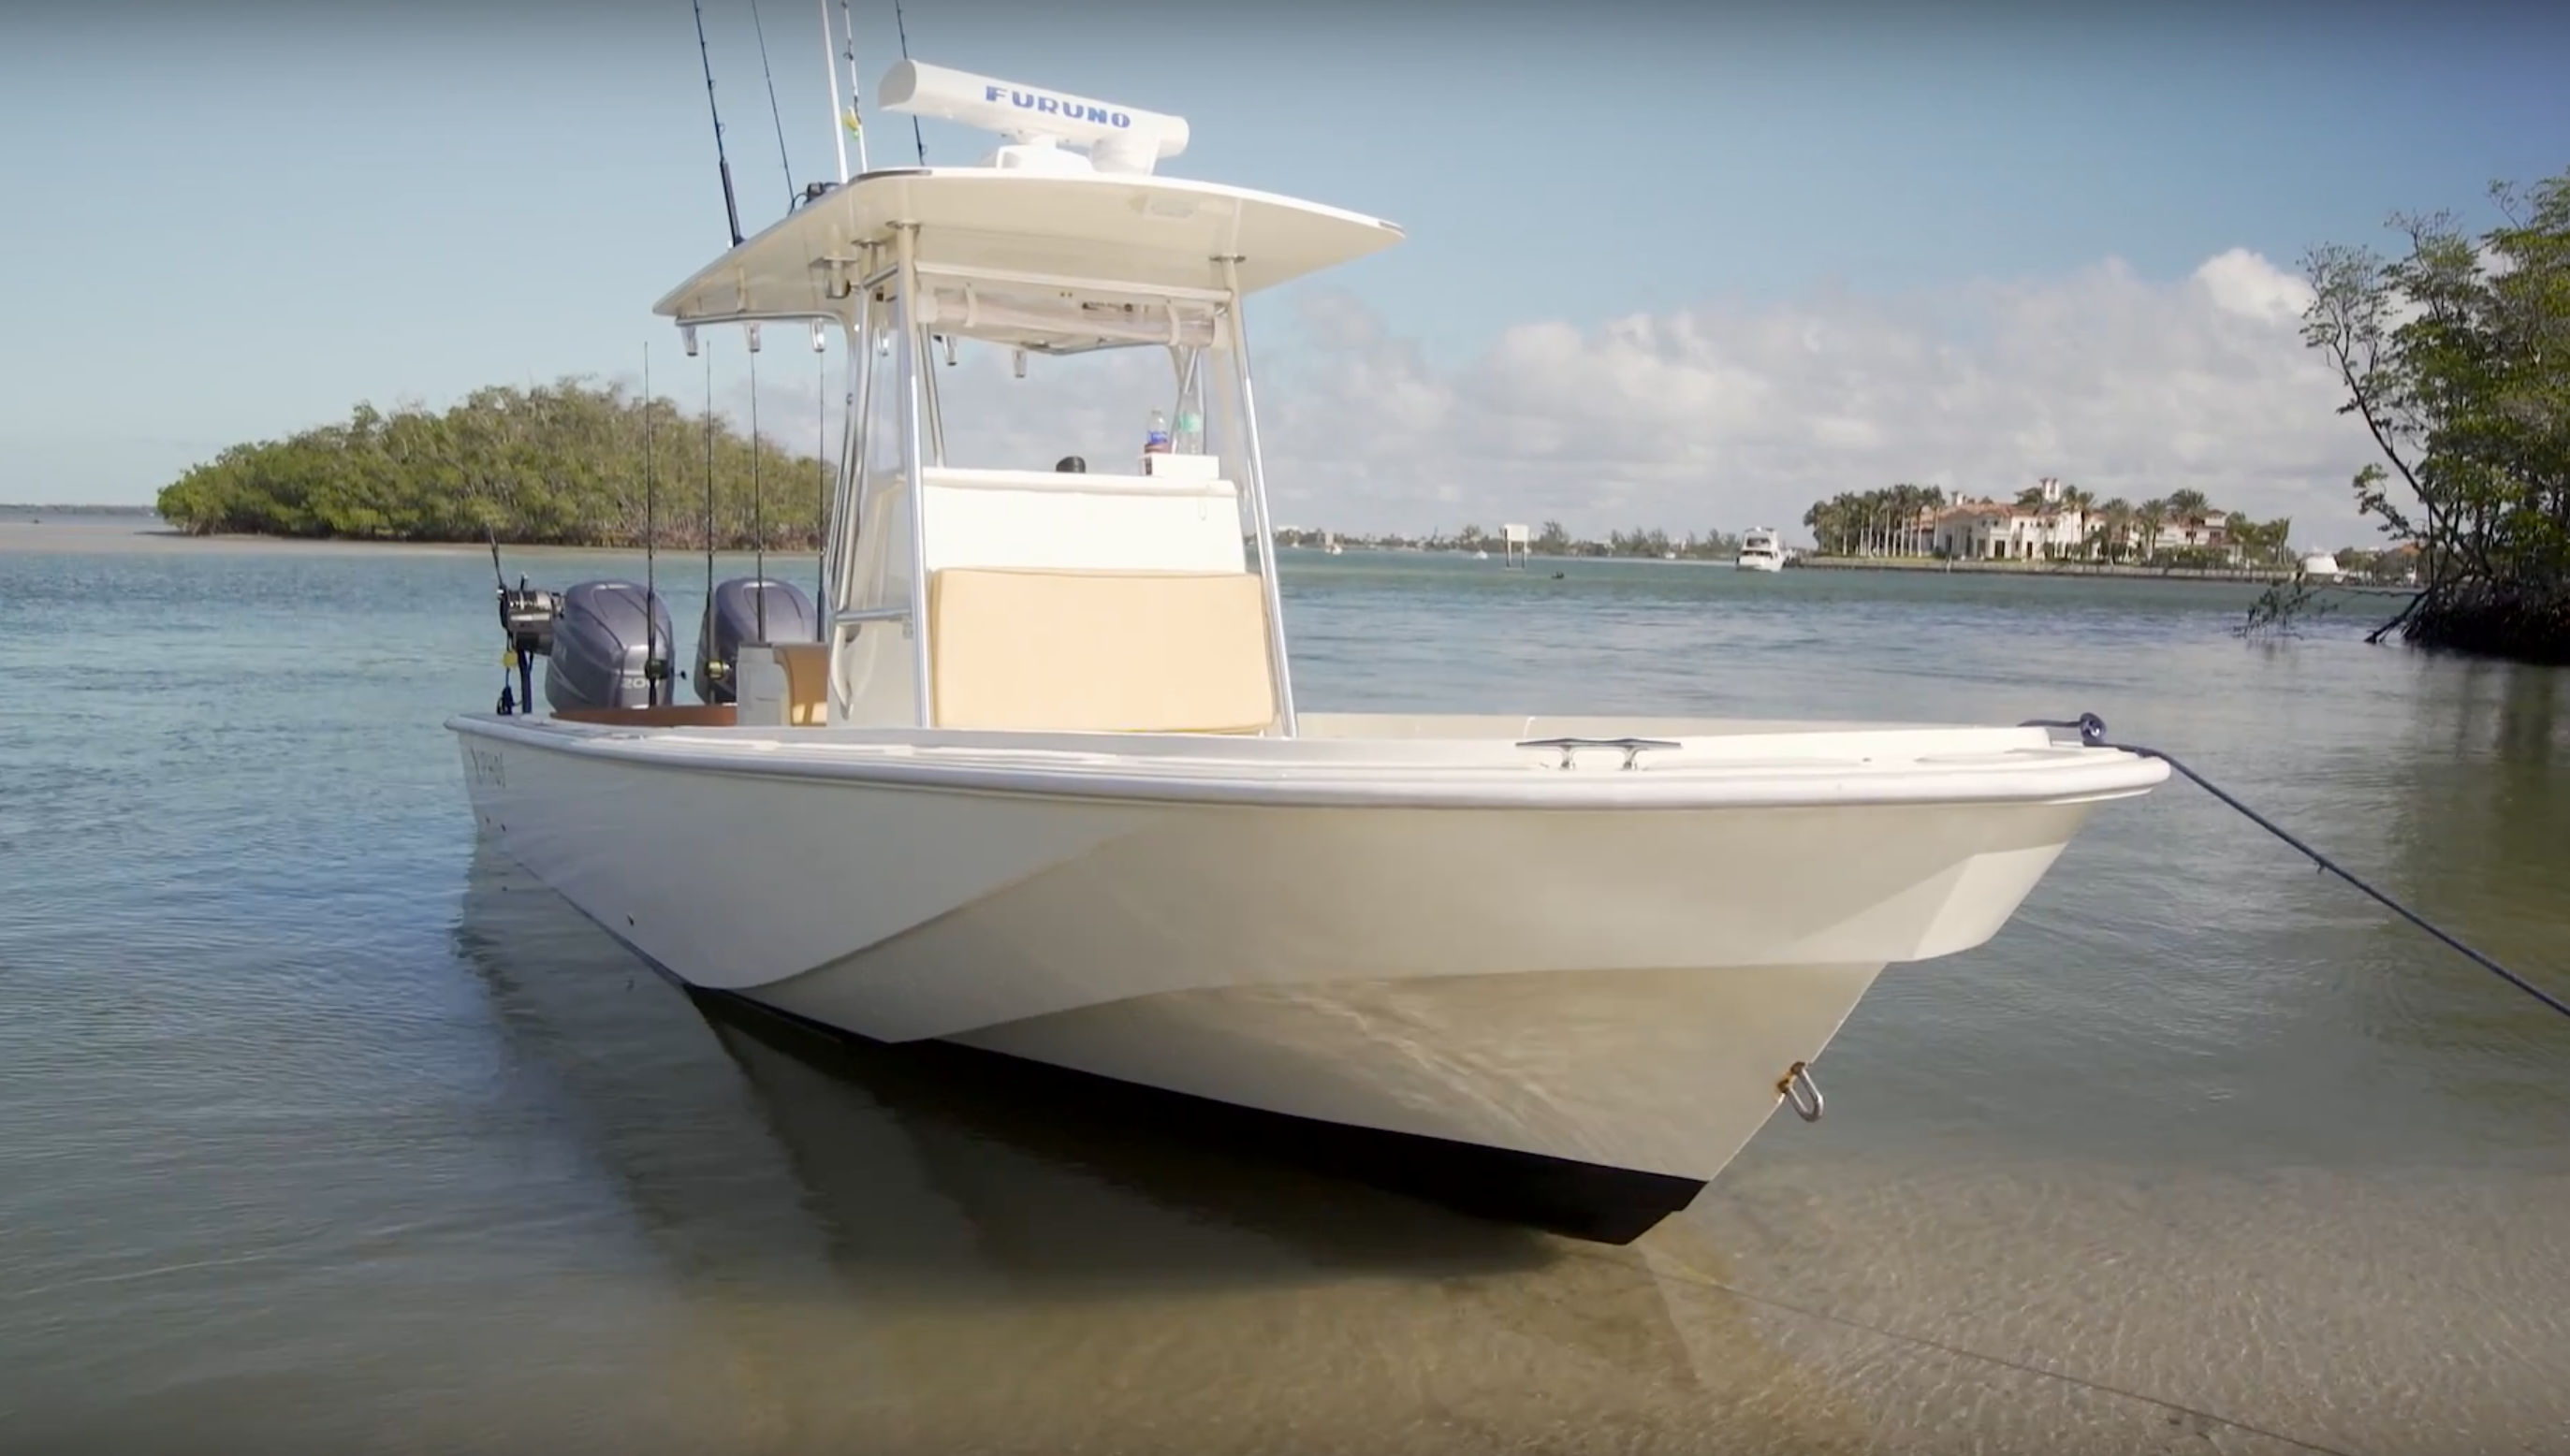 Florida Sportsman Project Dreamboat - Customized Contender 25, Outrageous Whaler